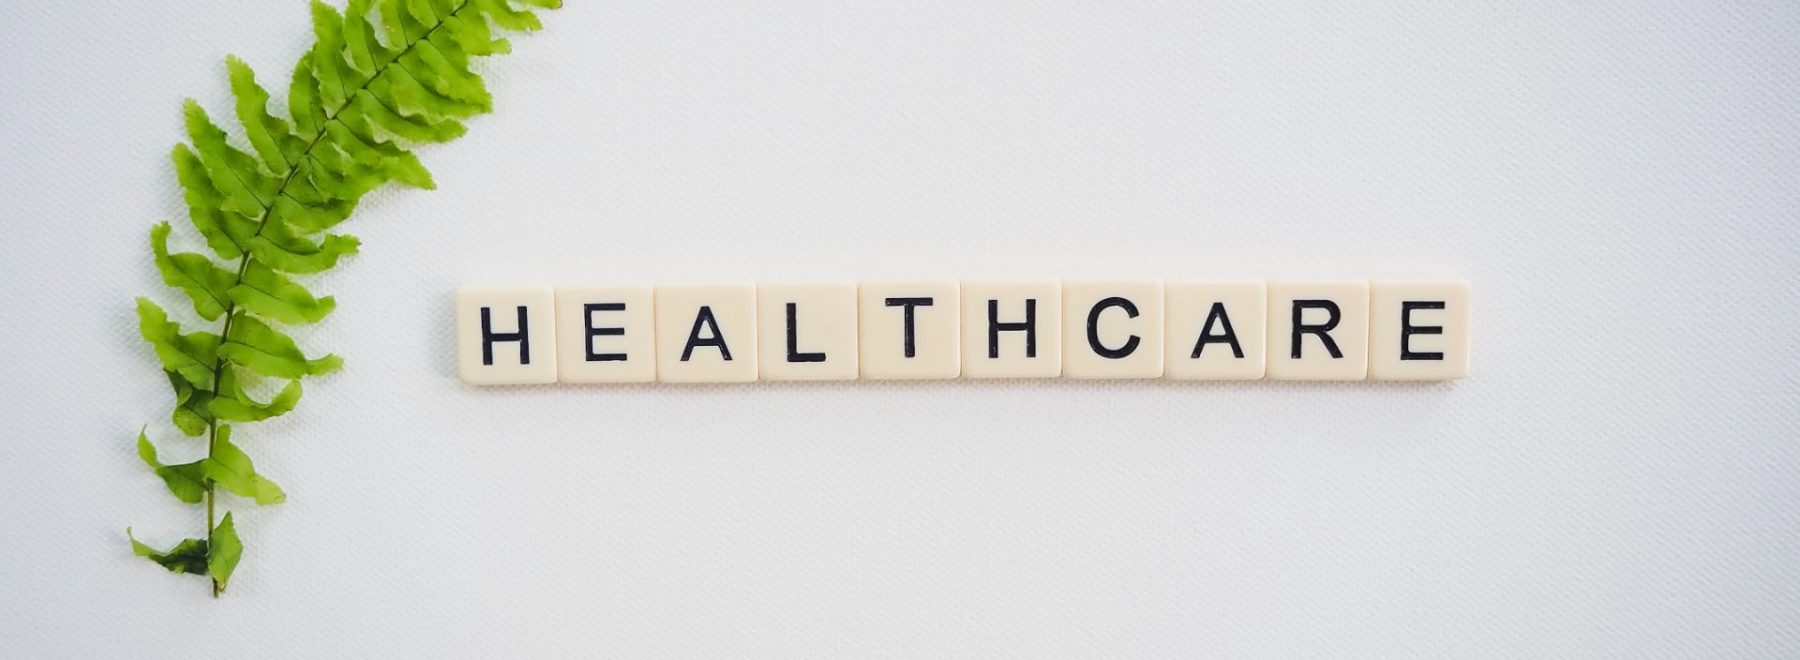 'HEALTHCARE' spelt out in scrabble letters